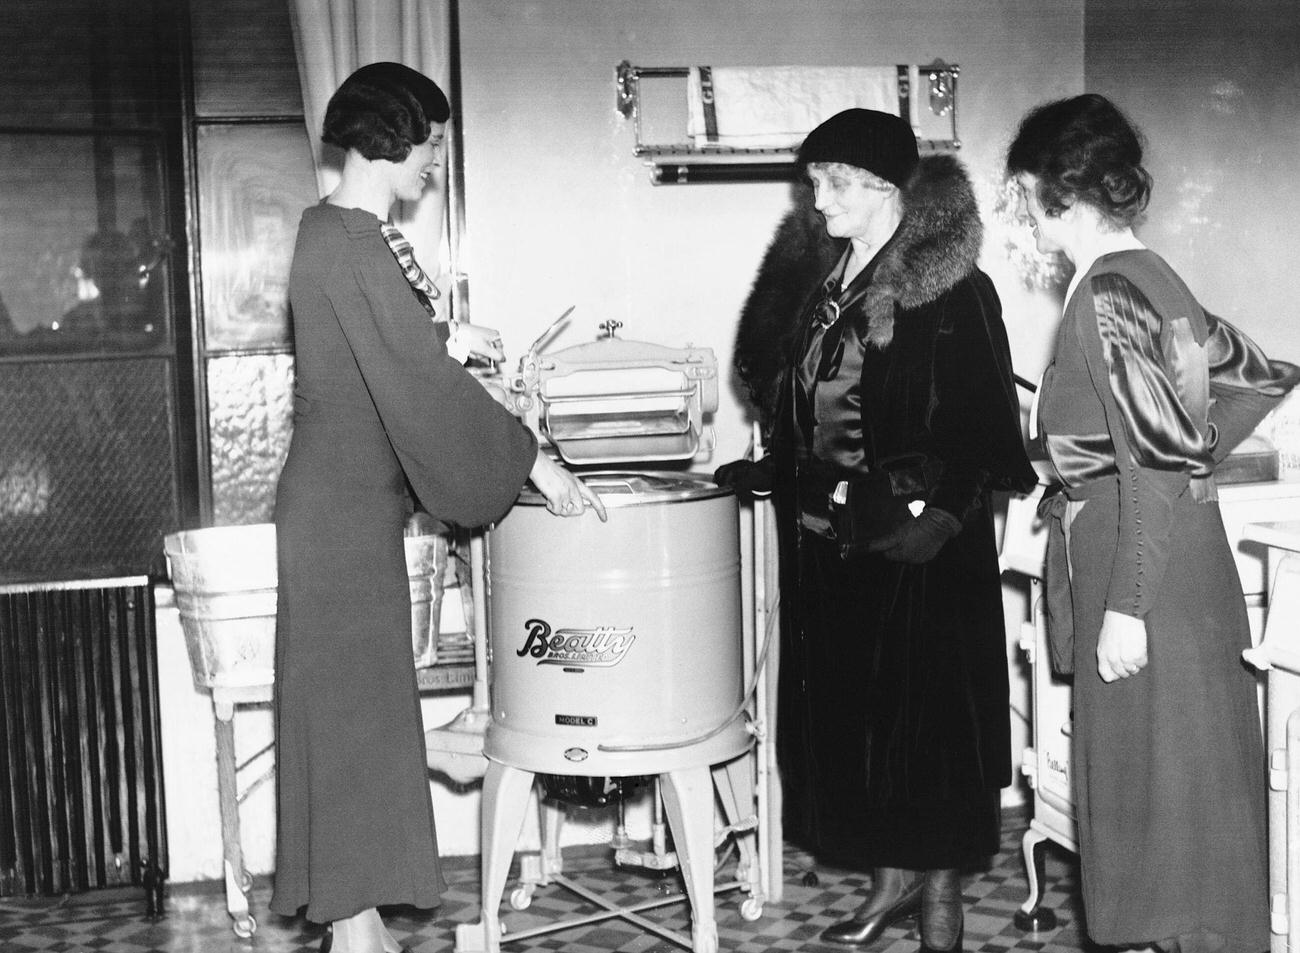 Lady Moir and Miss. Minoprio inspecting a combined washing machine and mangle.